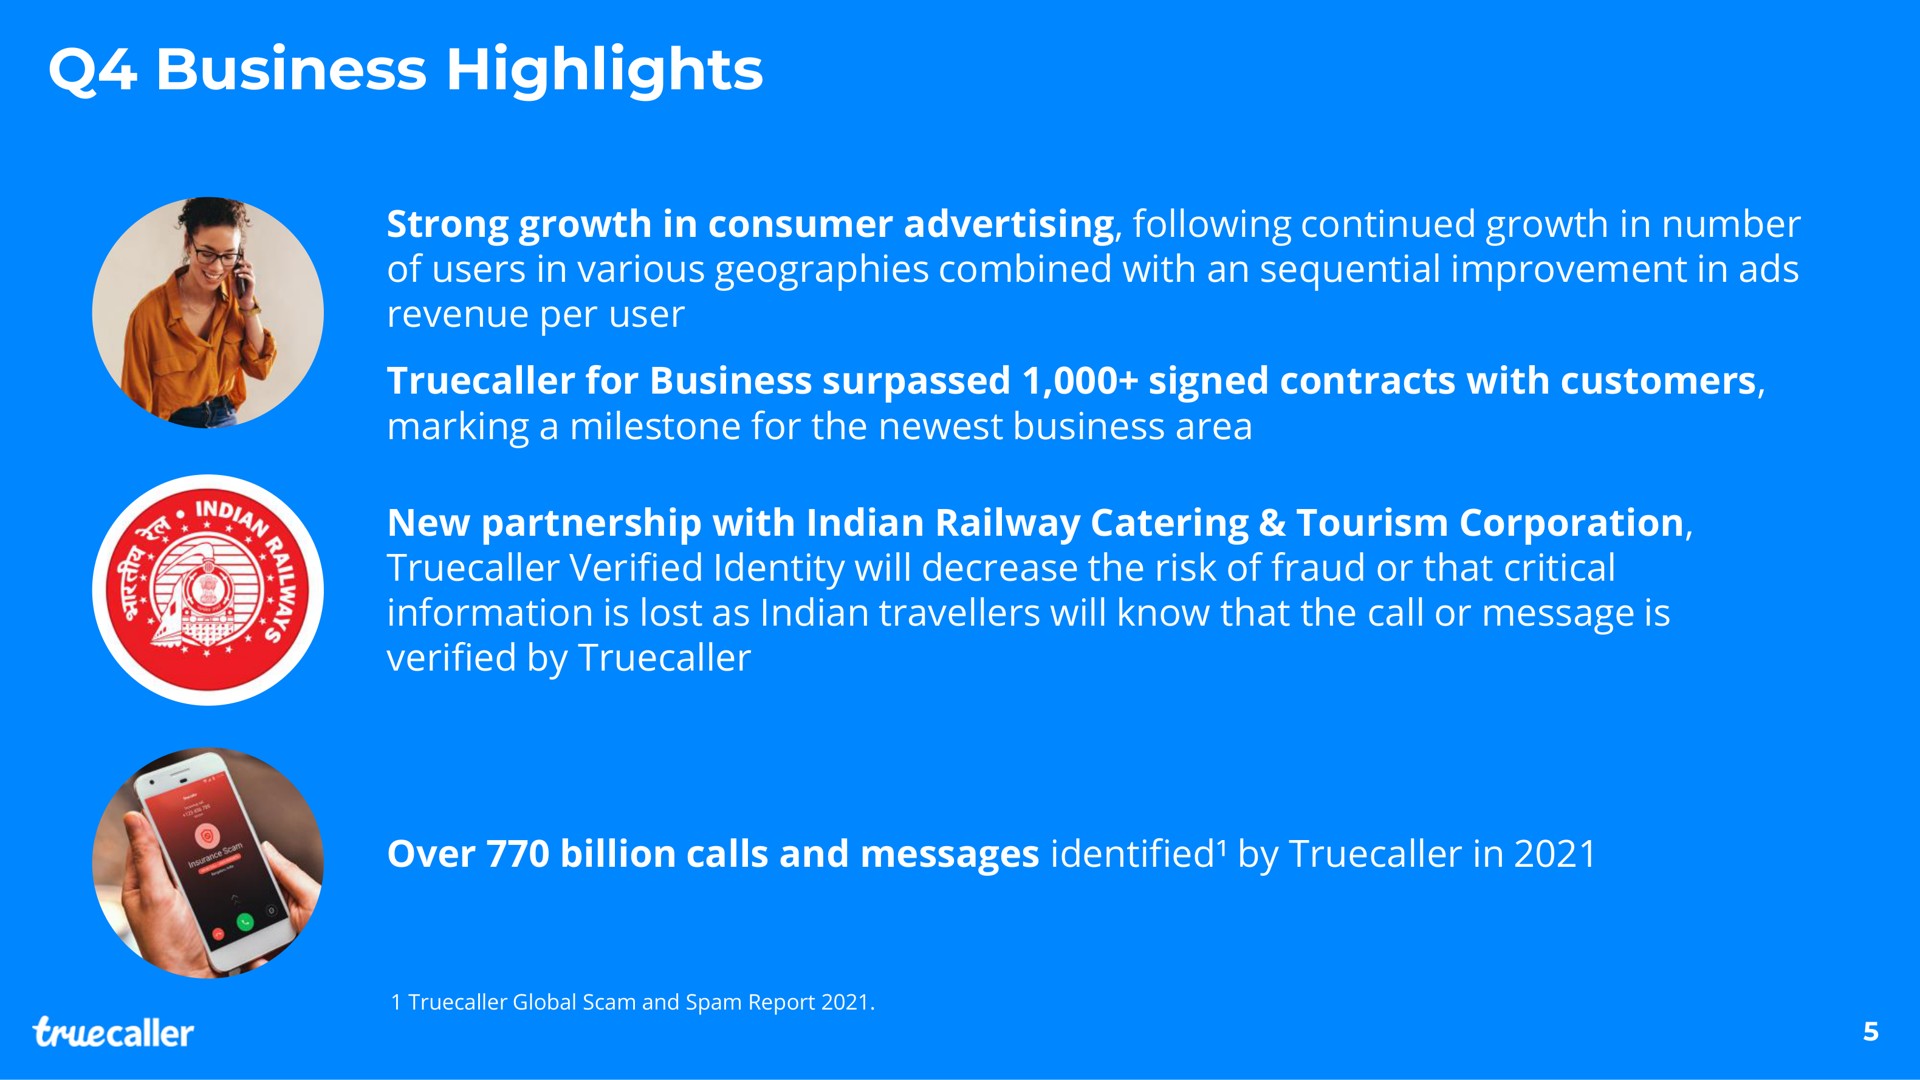 business highlights strong growth in consumer advertising following continued growth in number of users in various geographies combined with an sequential improvement in ads revenue per user for business surpassed signed contracts with customers marking a milestone for the business area new partnership with railway catering tourism corporation verified identity will decrease the risk of fraud or that critical information is lost as travellers will know that the call or message is verified by over billion calls and messages identified by in so | Truecaller